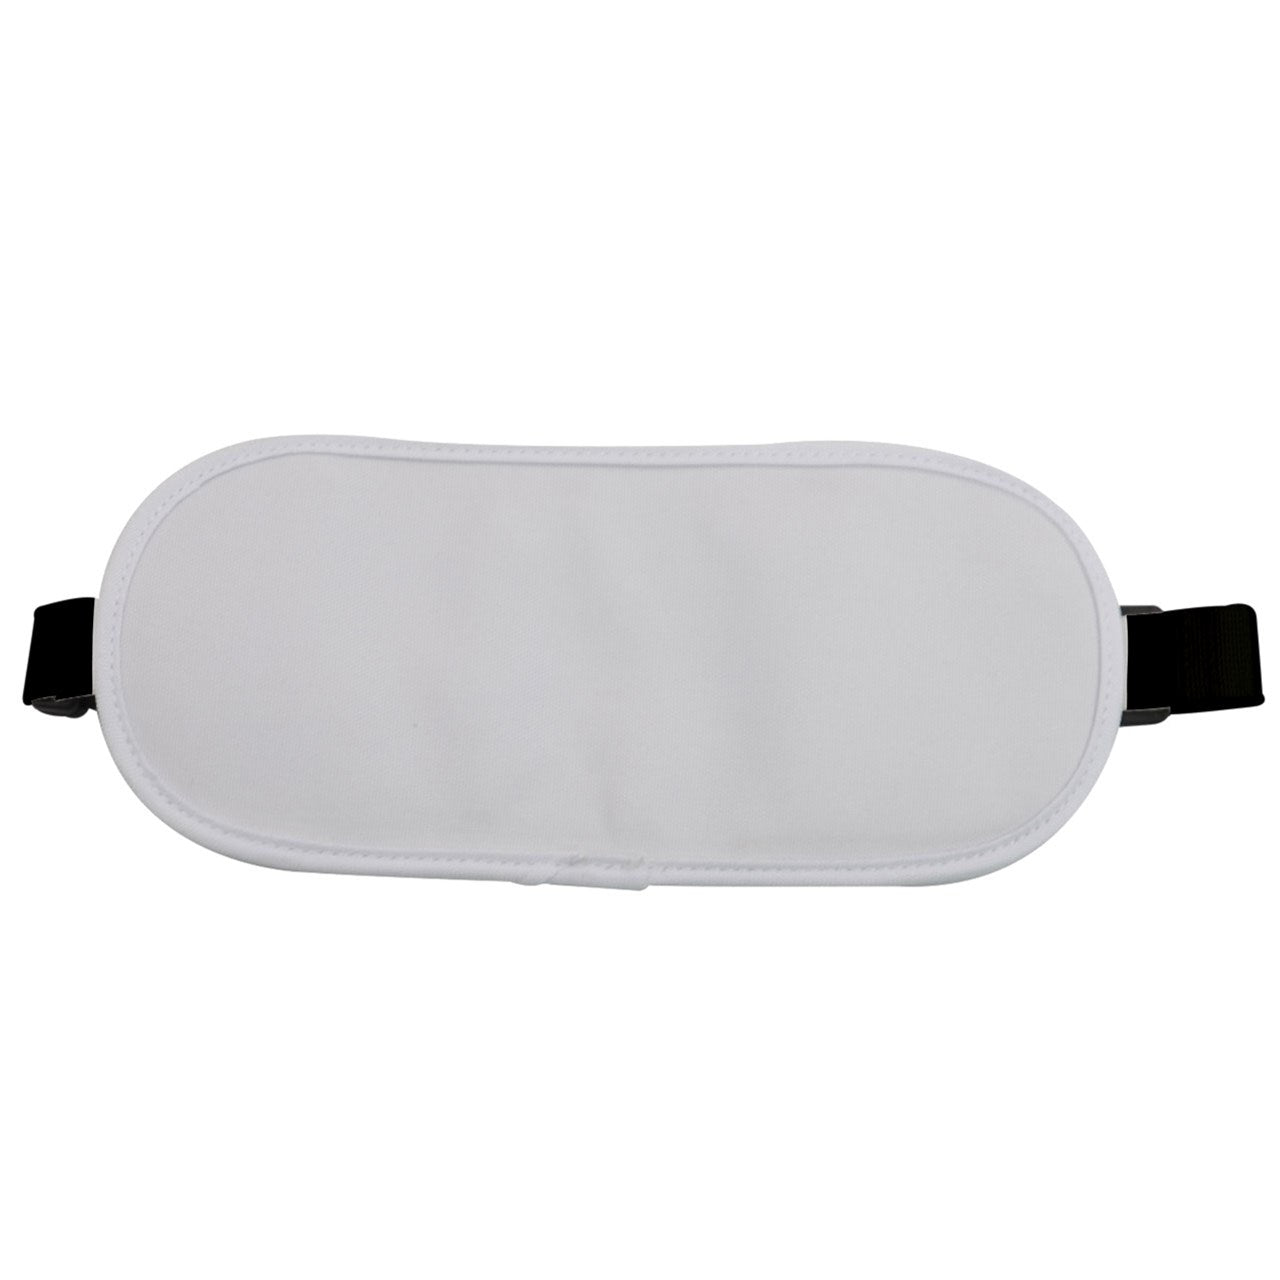 Game Over Rounded Waist Pouch